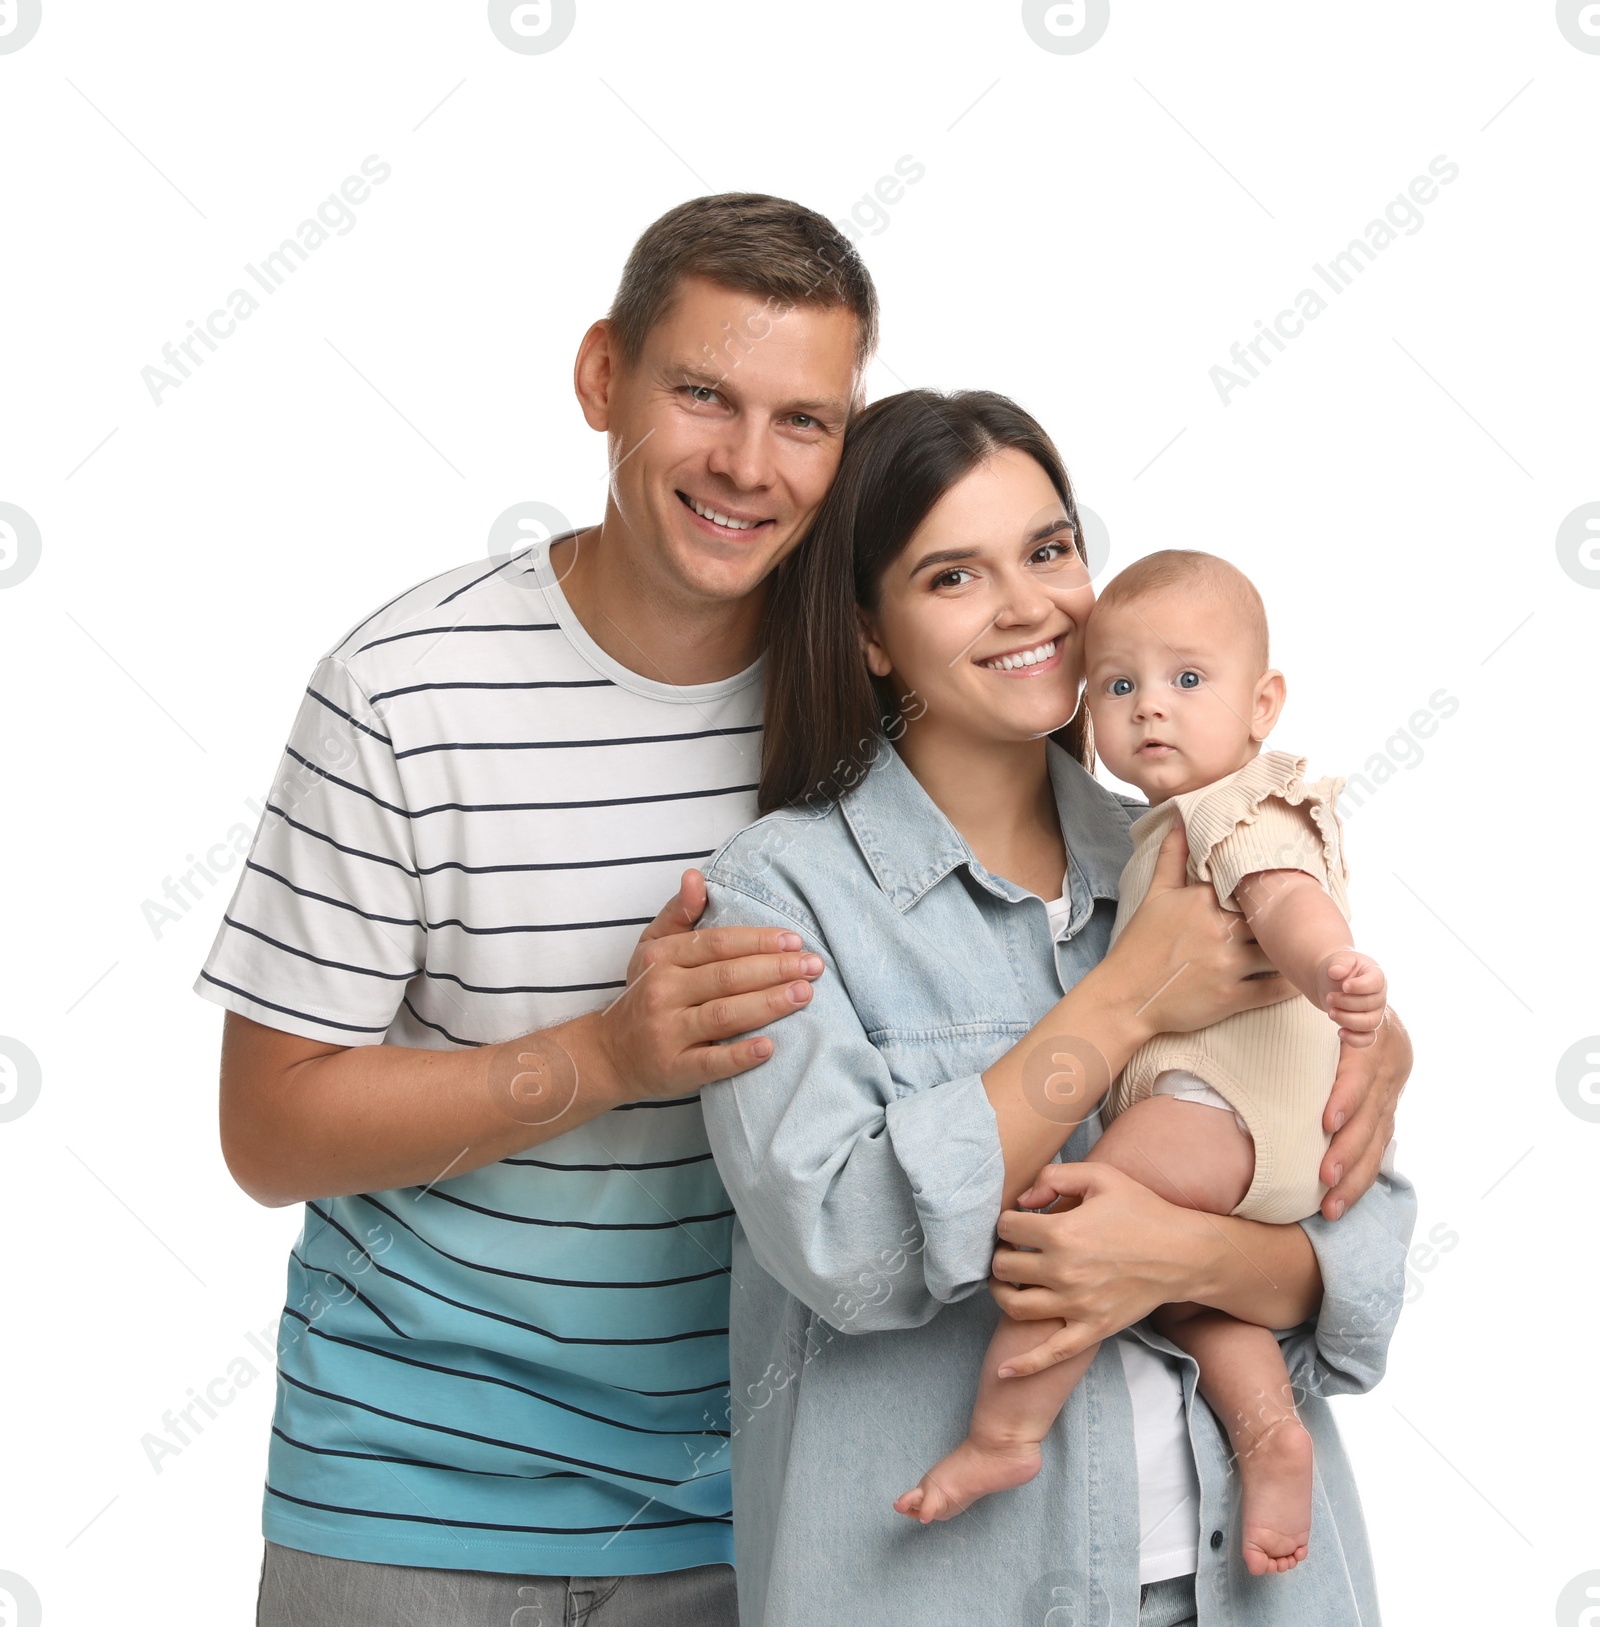 Photo of Portrait of happy family with their cute baby on white background